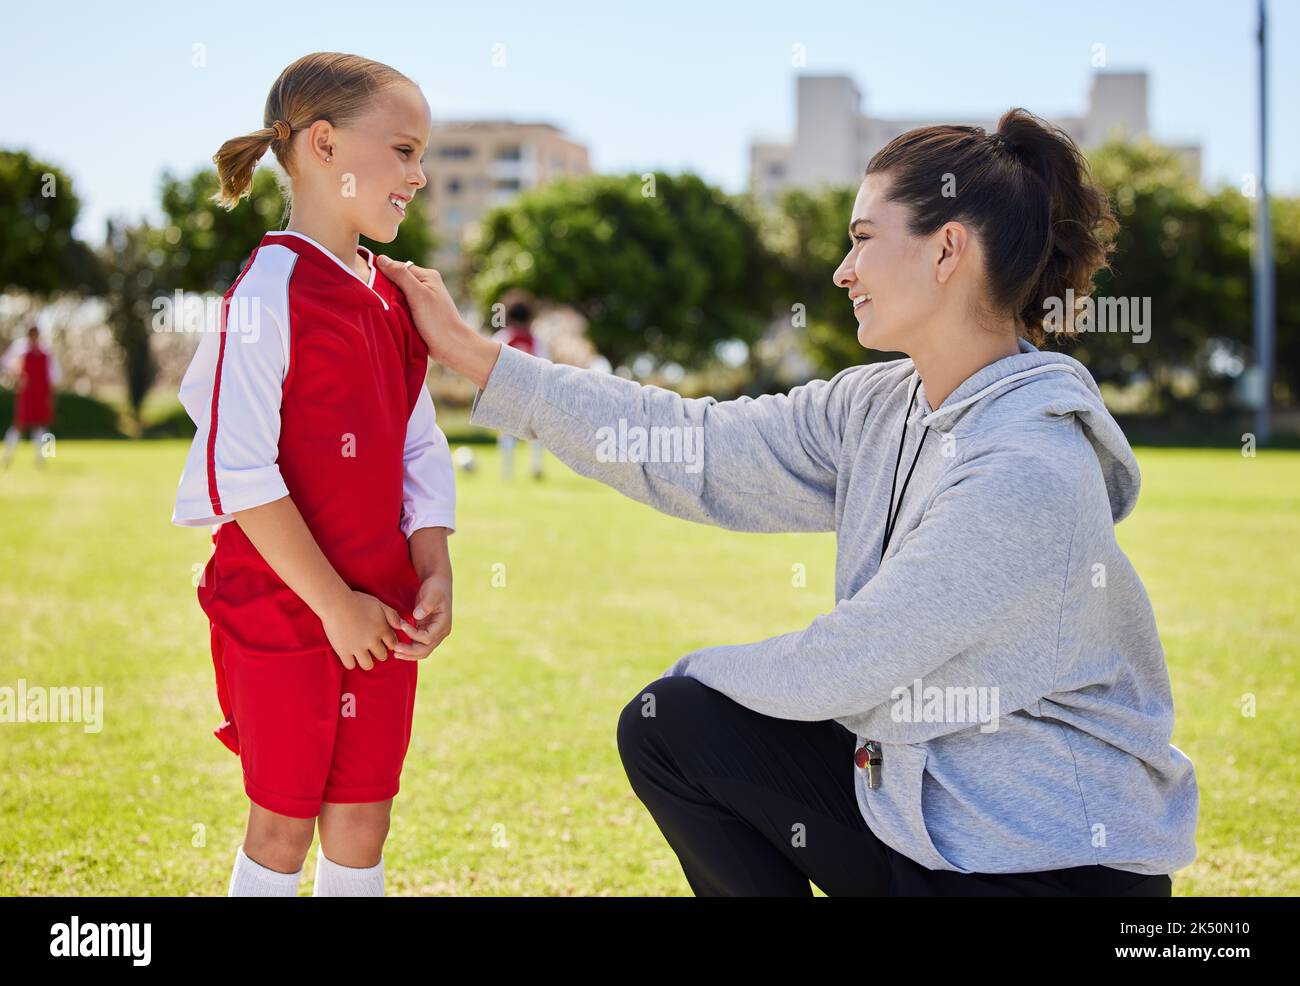 Girl, coach and soccer for motivation, inspiration and help on field for better performance in sport. Woman, child and football together on grass Stock Photo